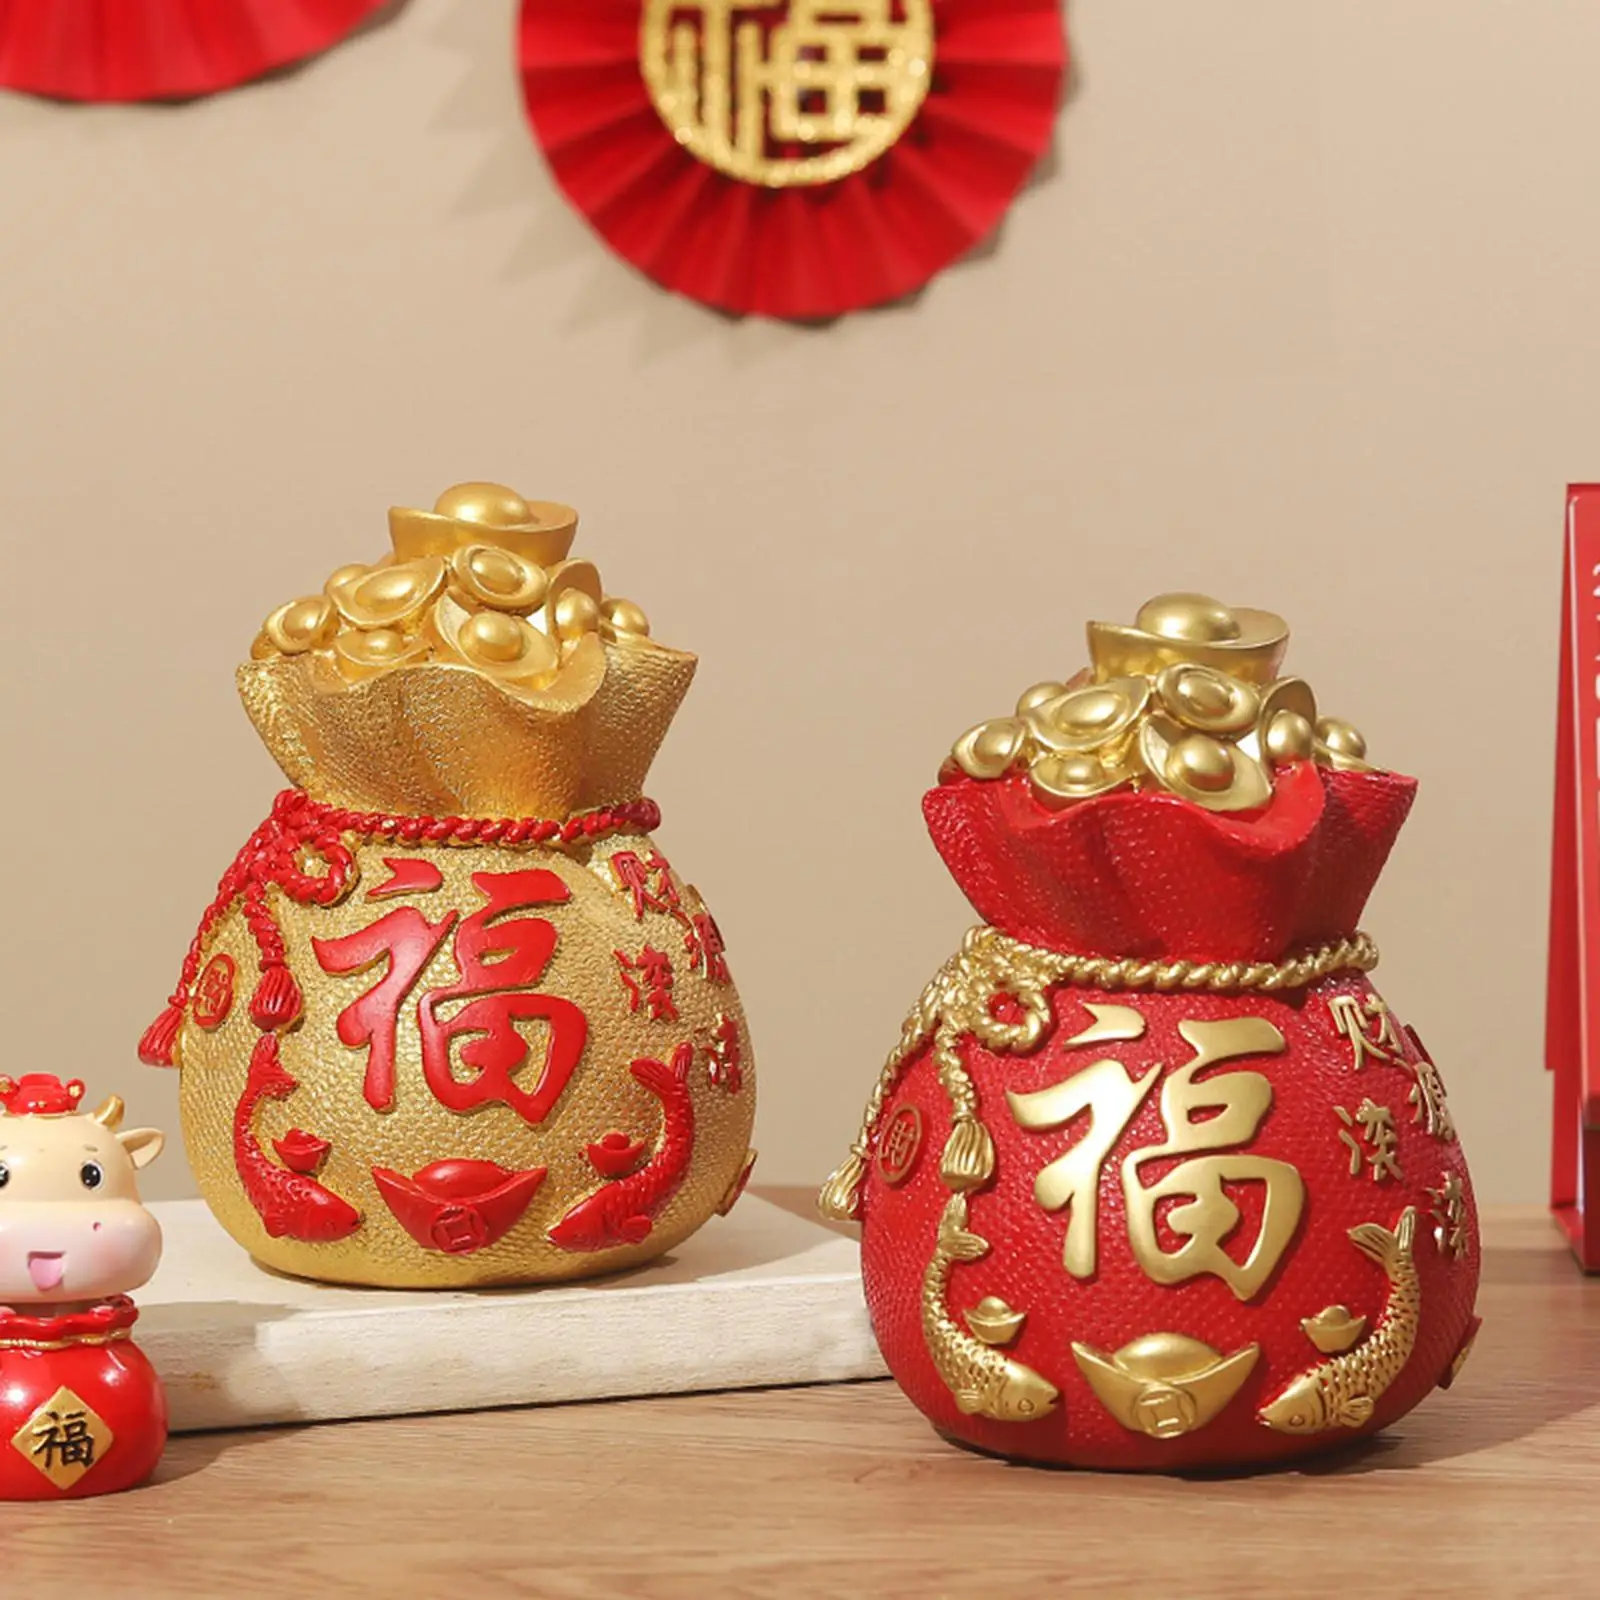 Resin Lucky Bag Piggy Bank Wealth Luck Coin Box Figurines Money Boxes Art Crafts for Tabletop Wedding Bedroom Home Decoration